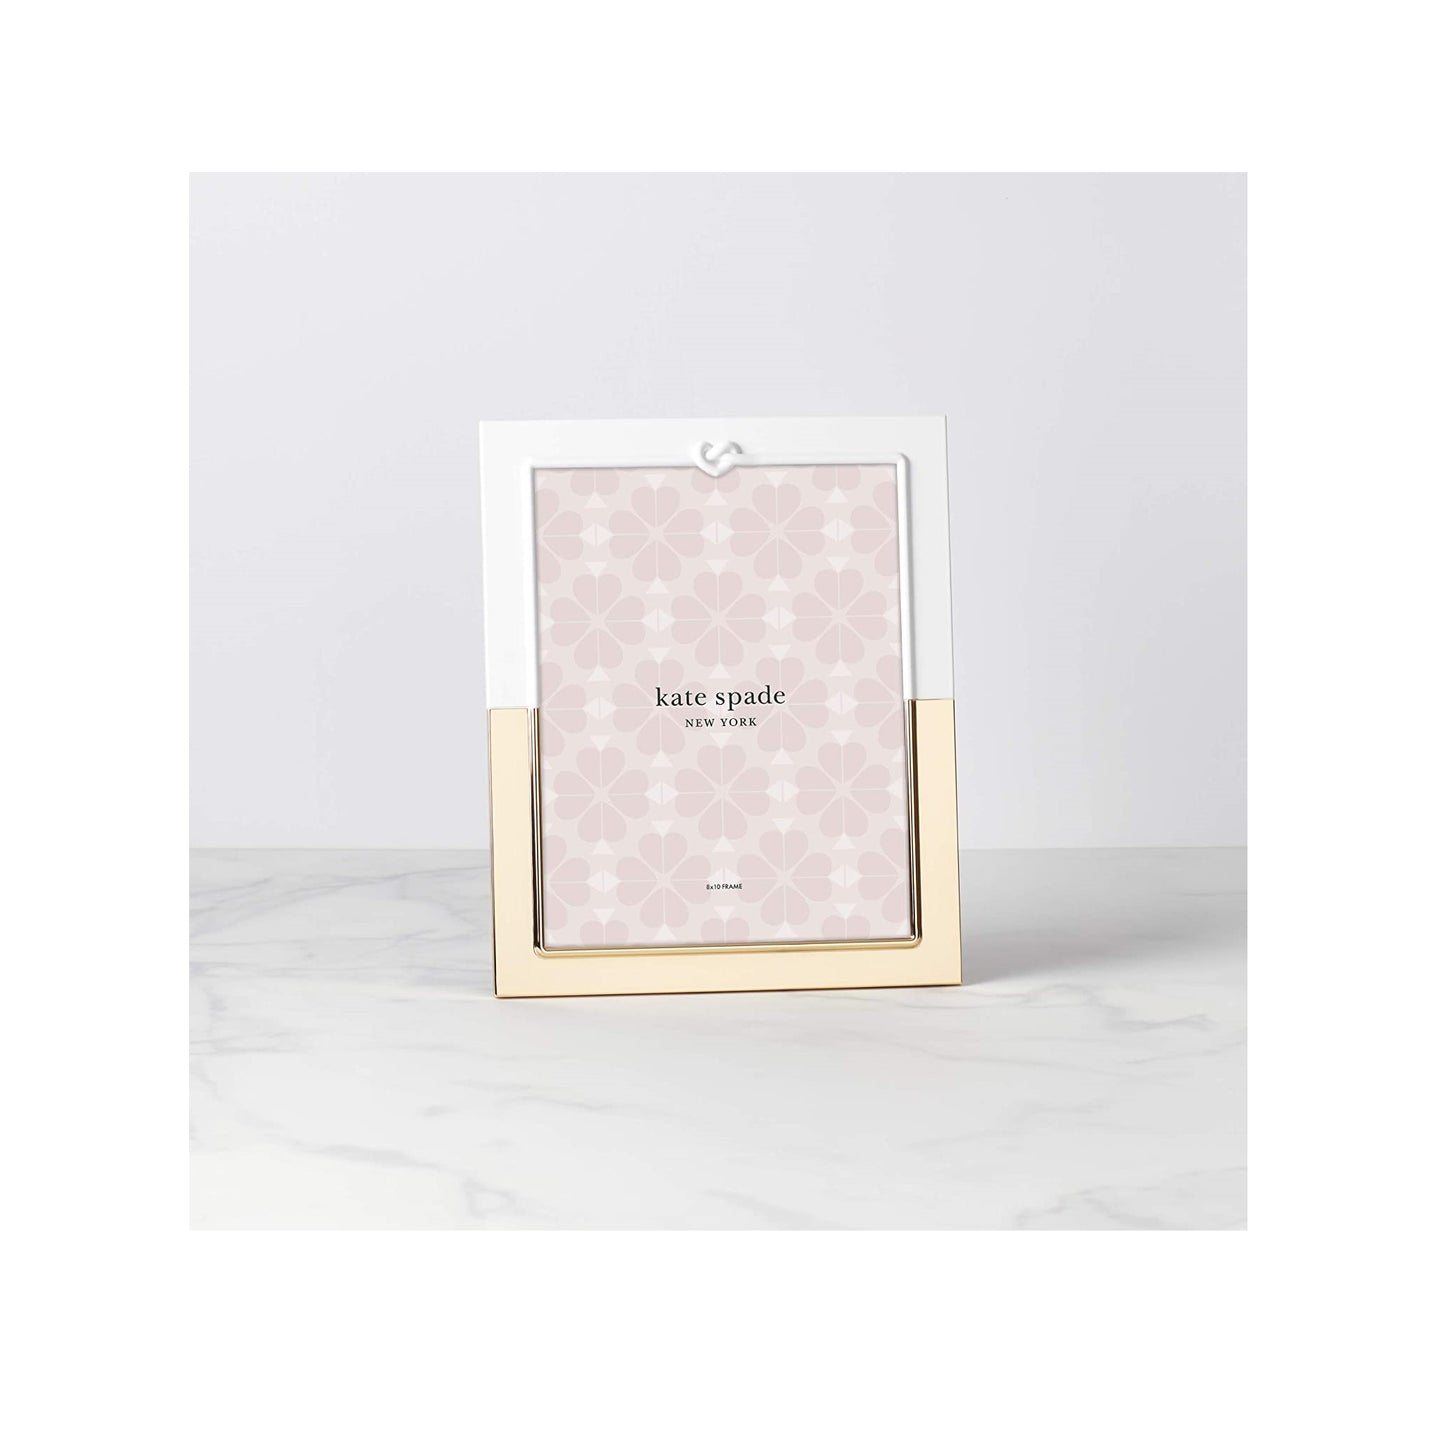 Kate Spade New York With Love 8x10 Frame by Lenox